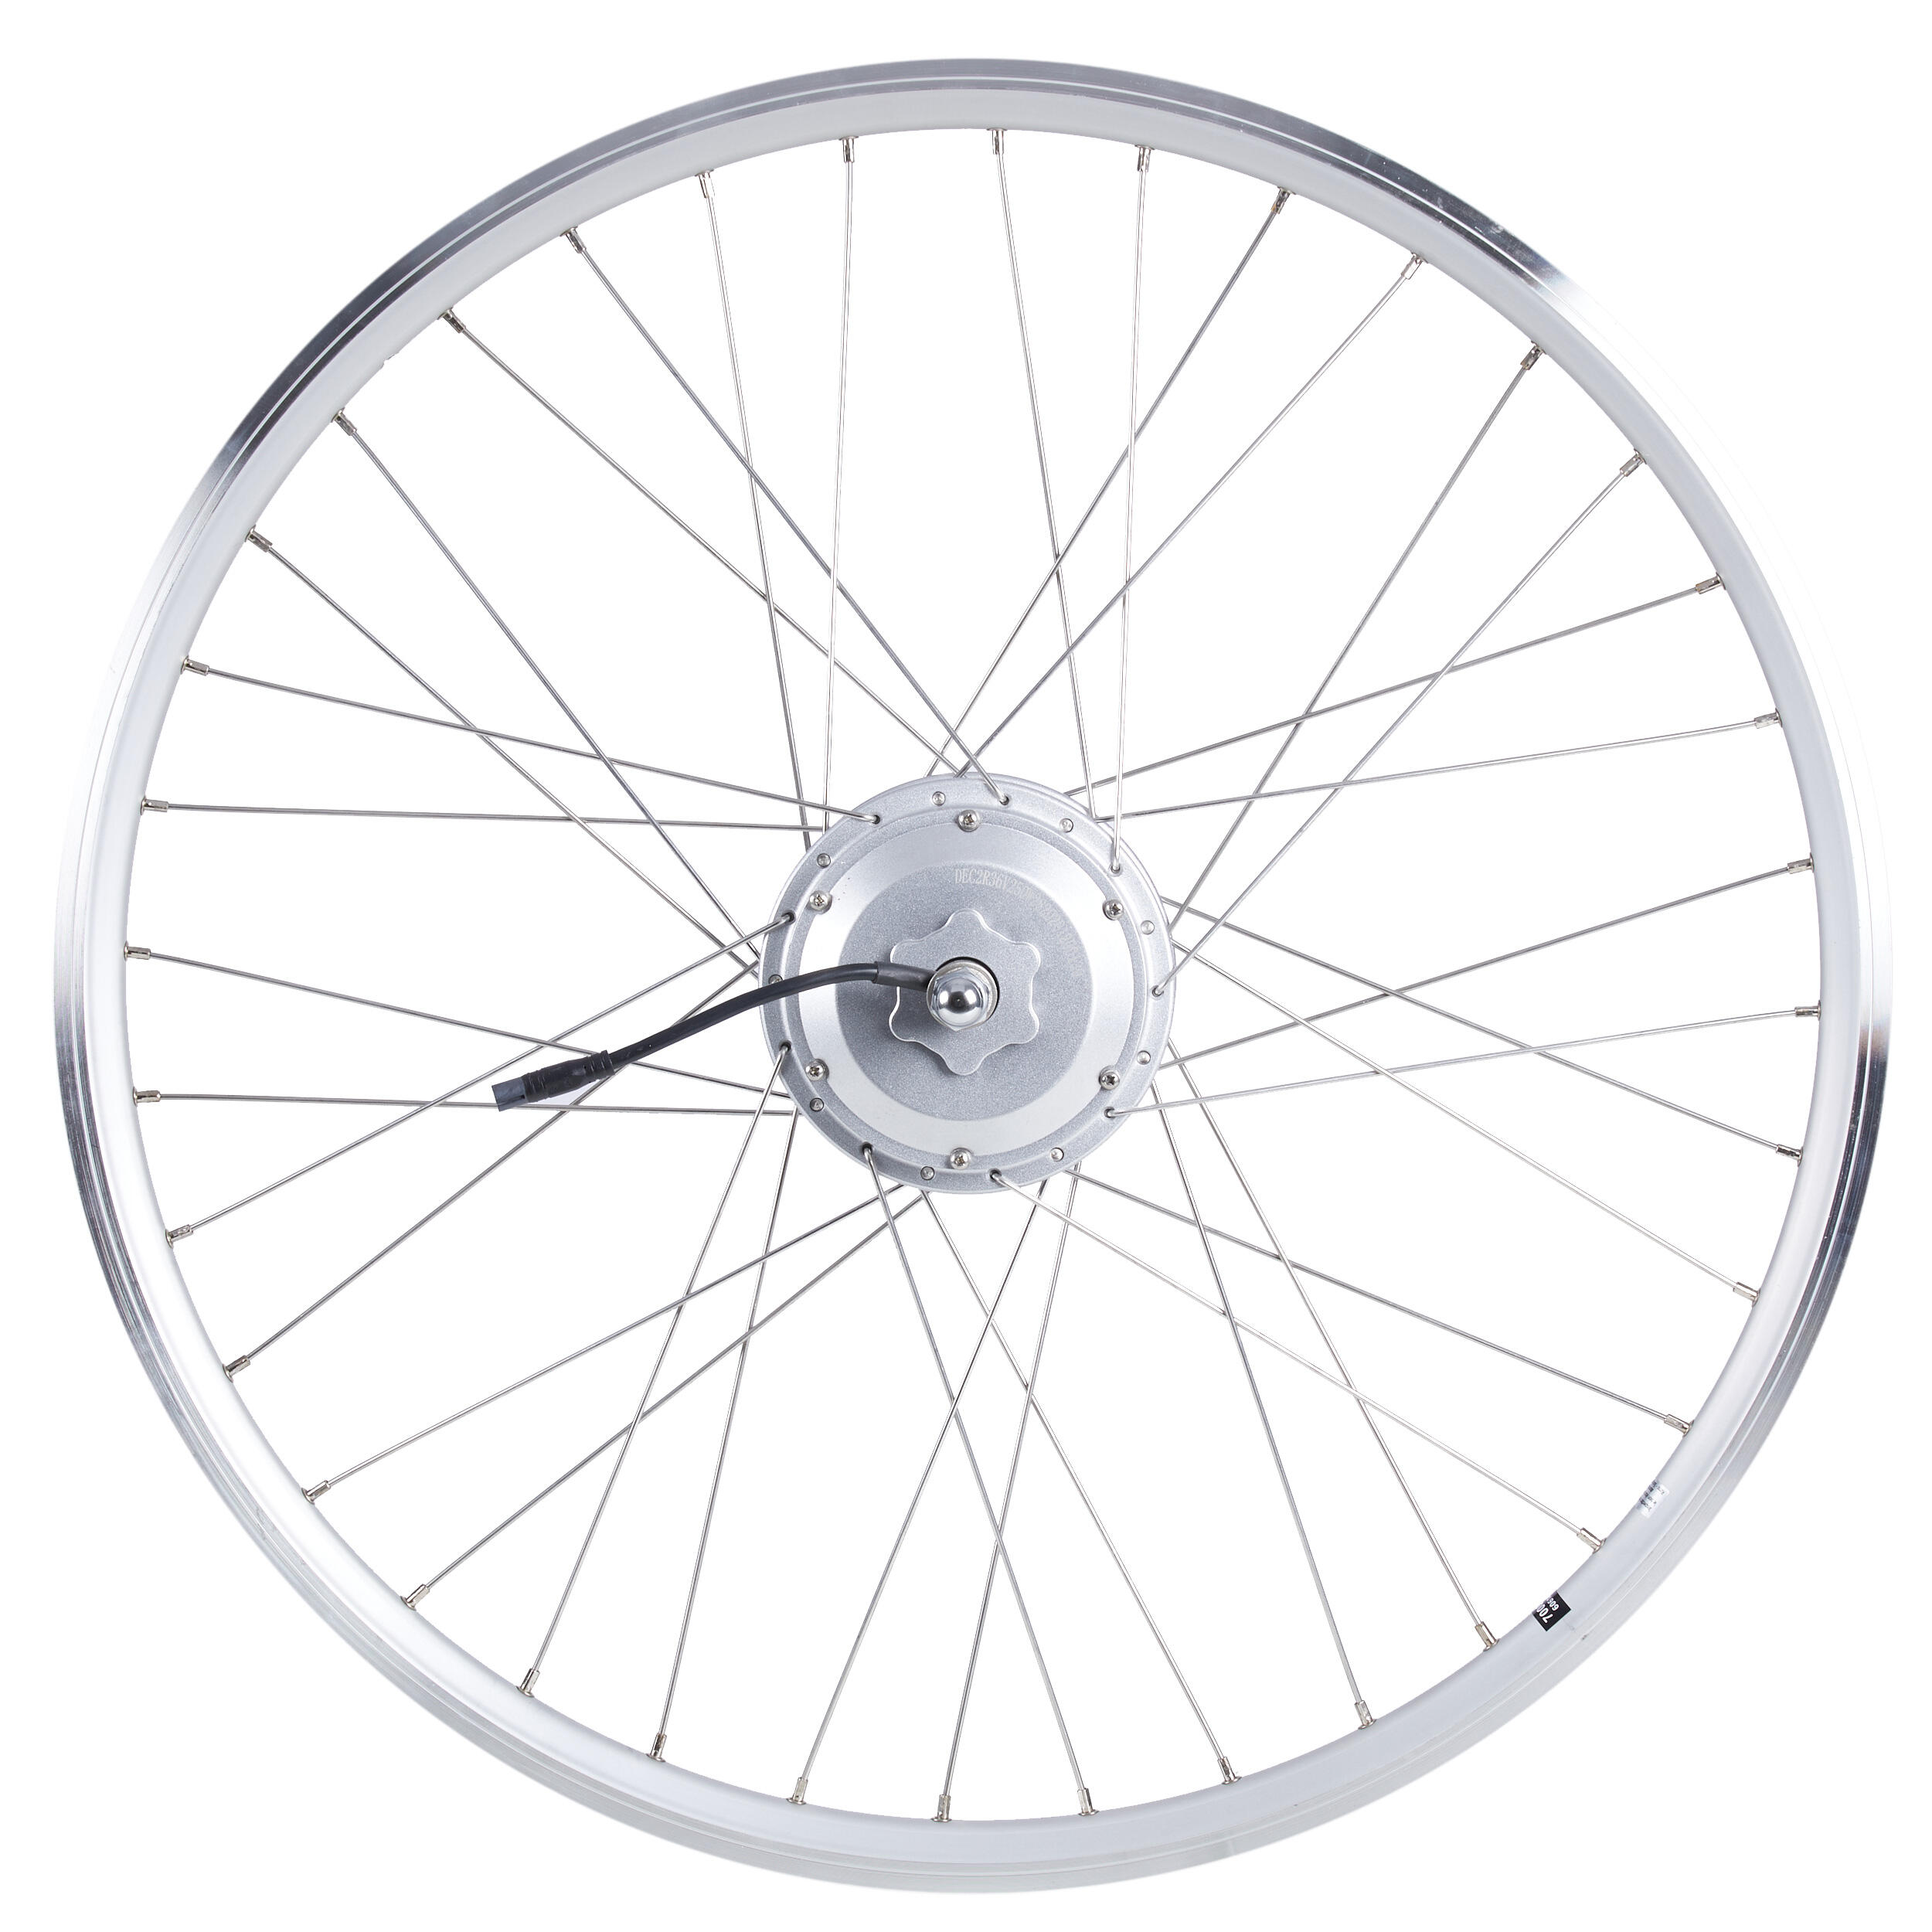 12 inch Spoke Replacement for Dirt Bike Front Or Rear Wheel Rims C Style Rim Hub Only 